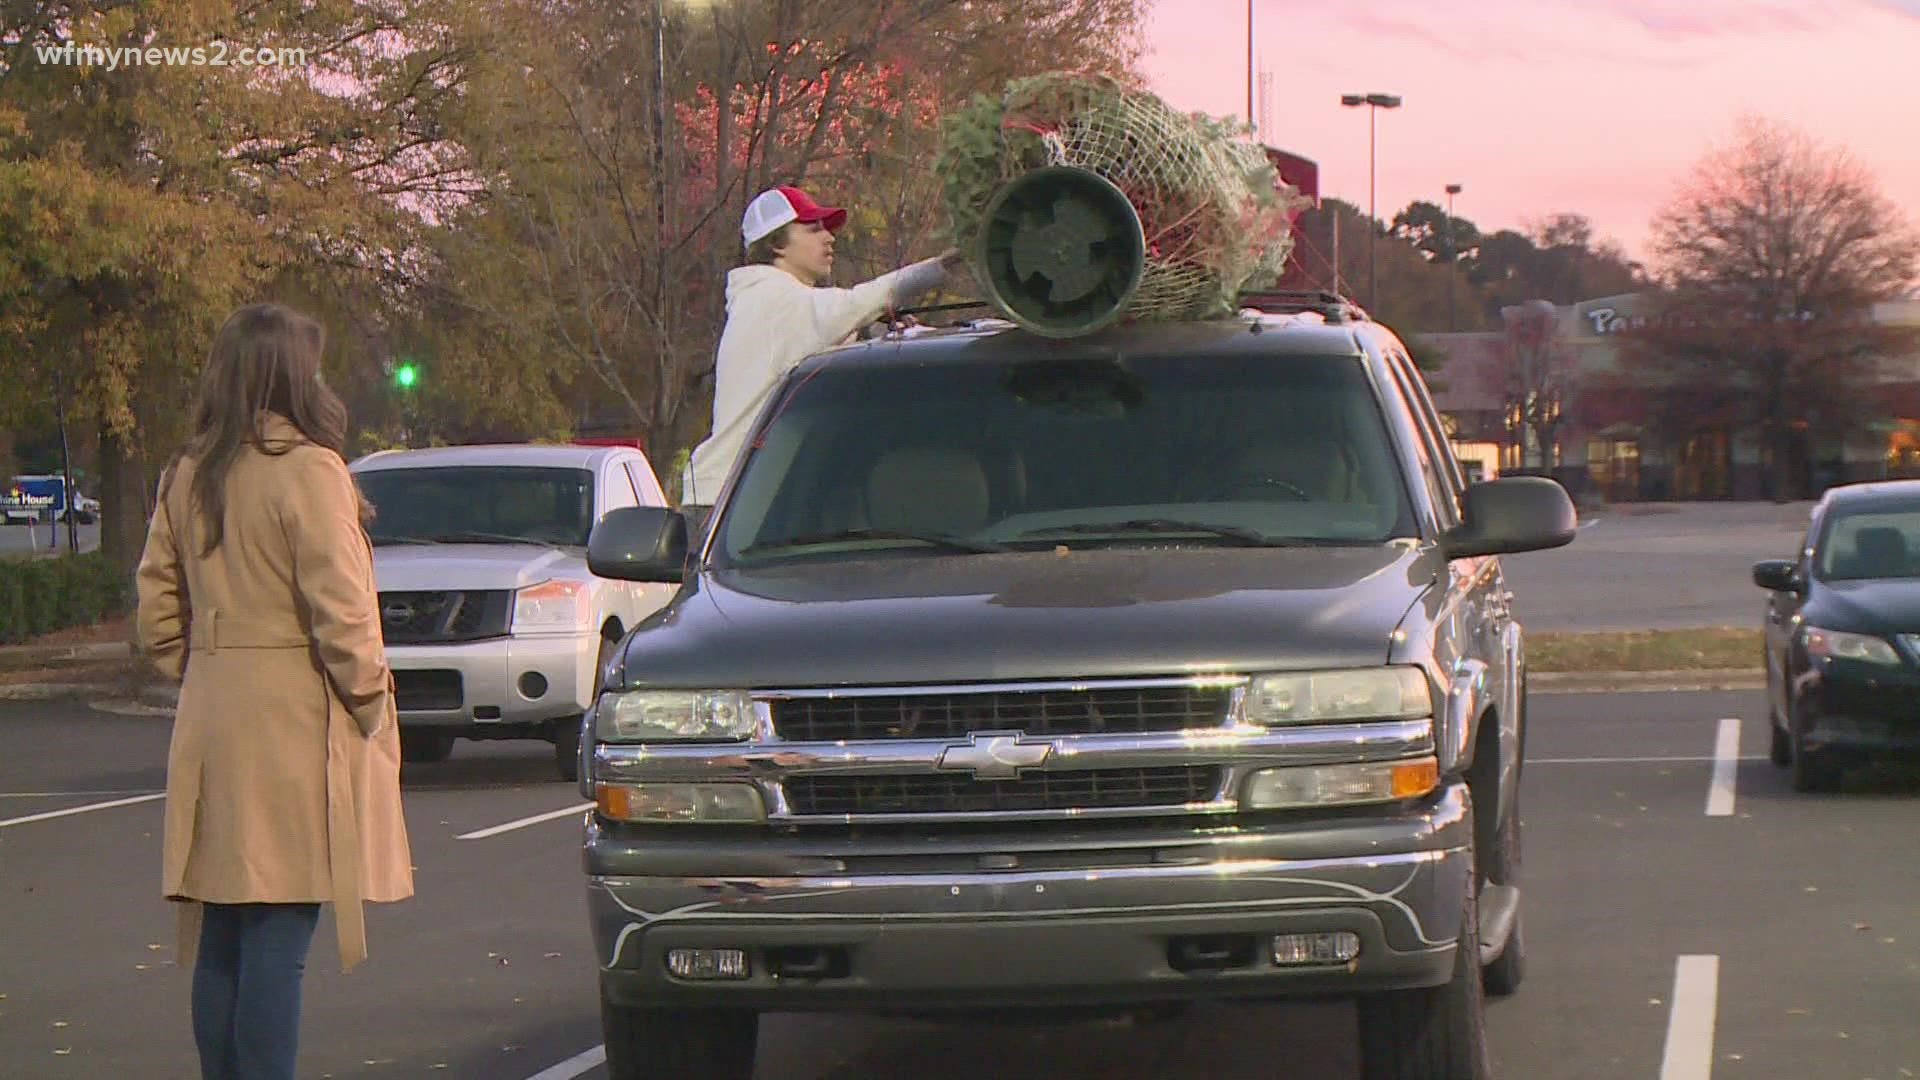 Some families came out early to the Christmas tree lot on Lawndale Drive in Greensboro.